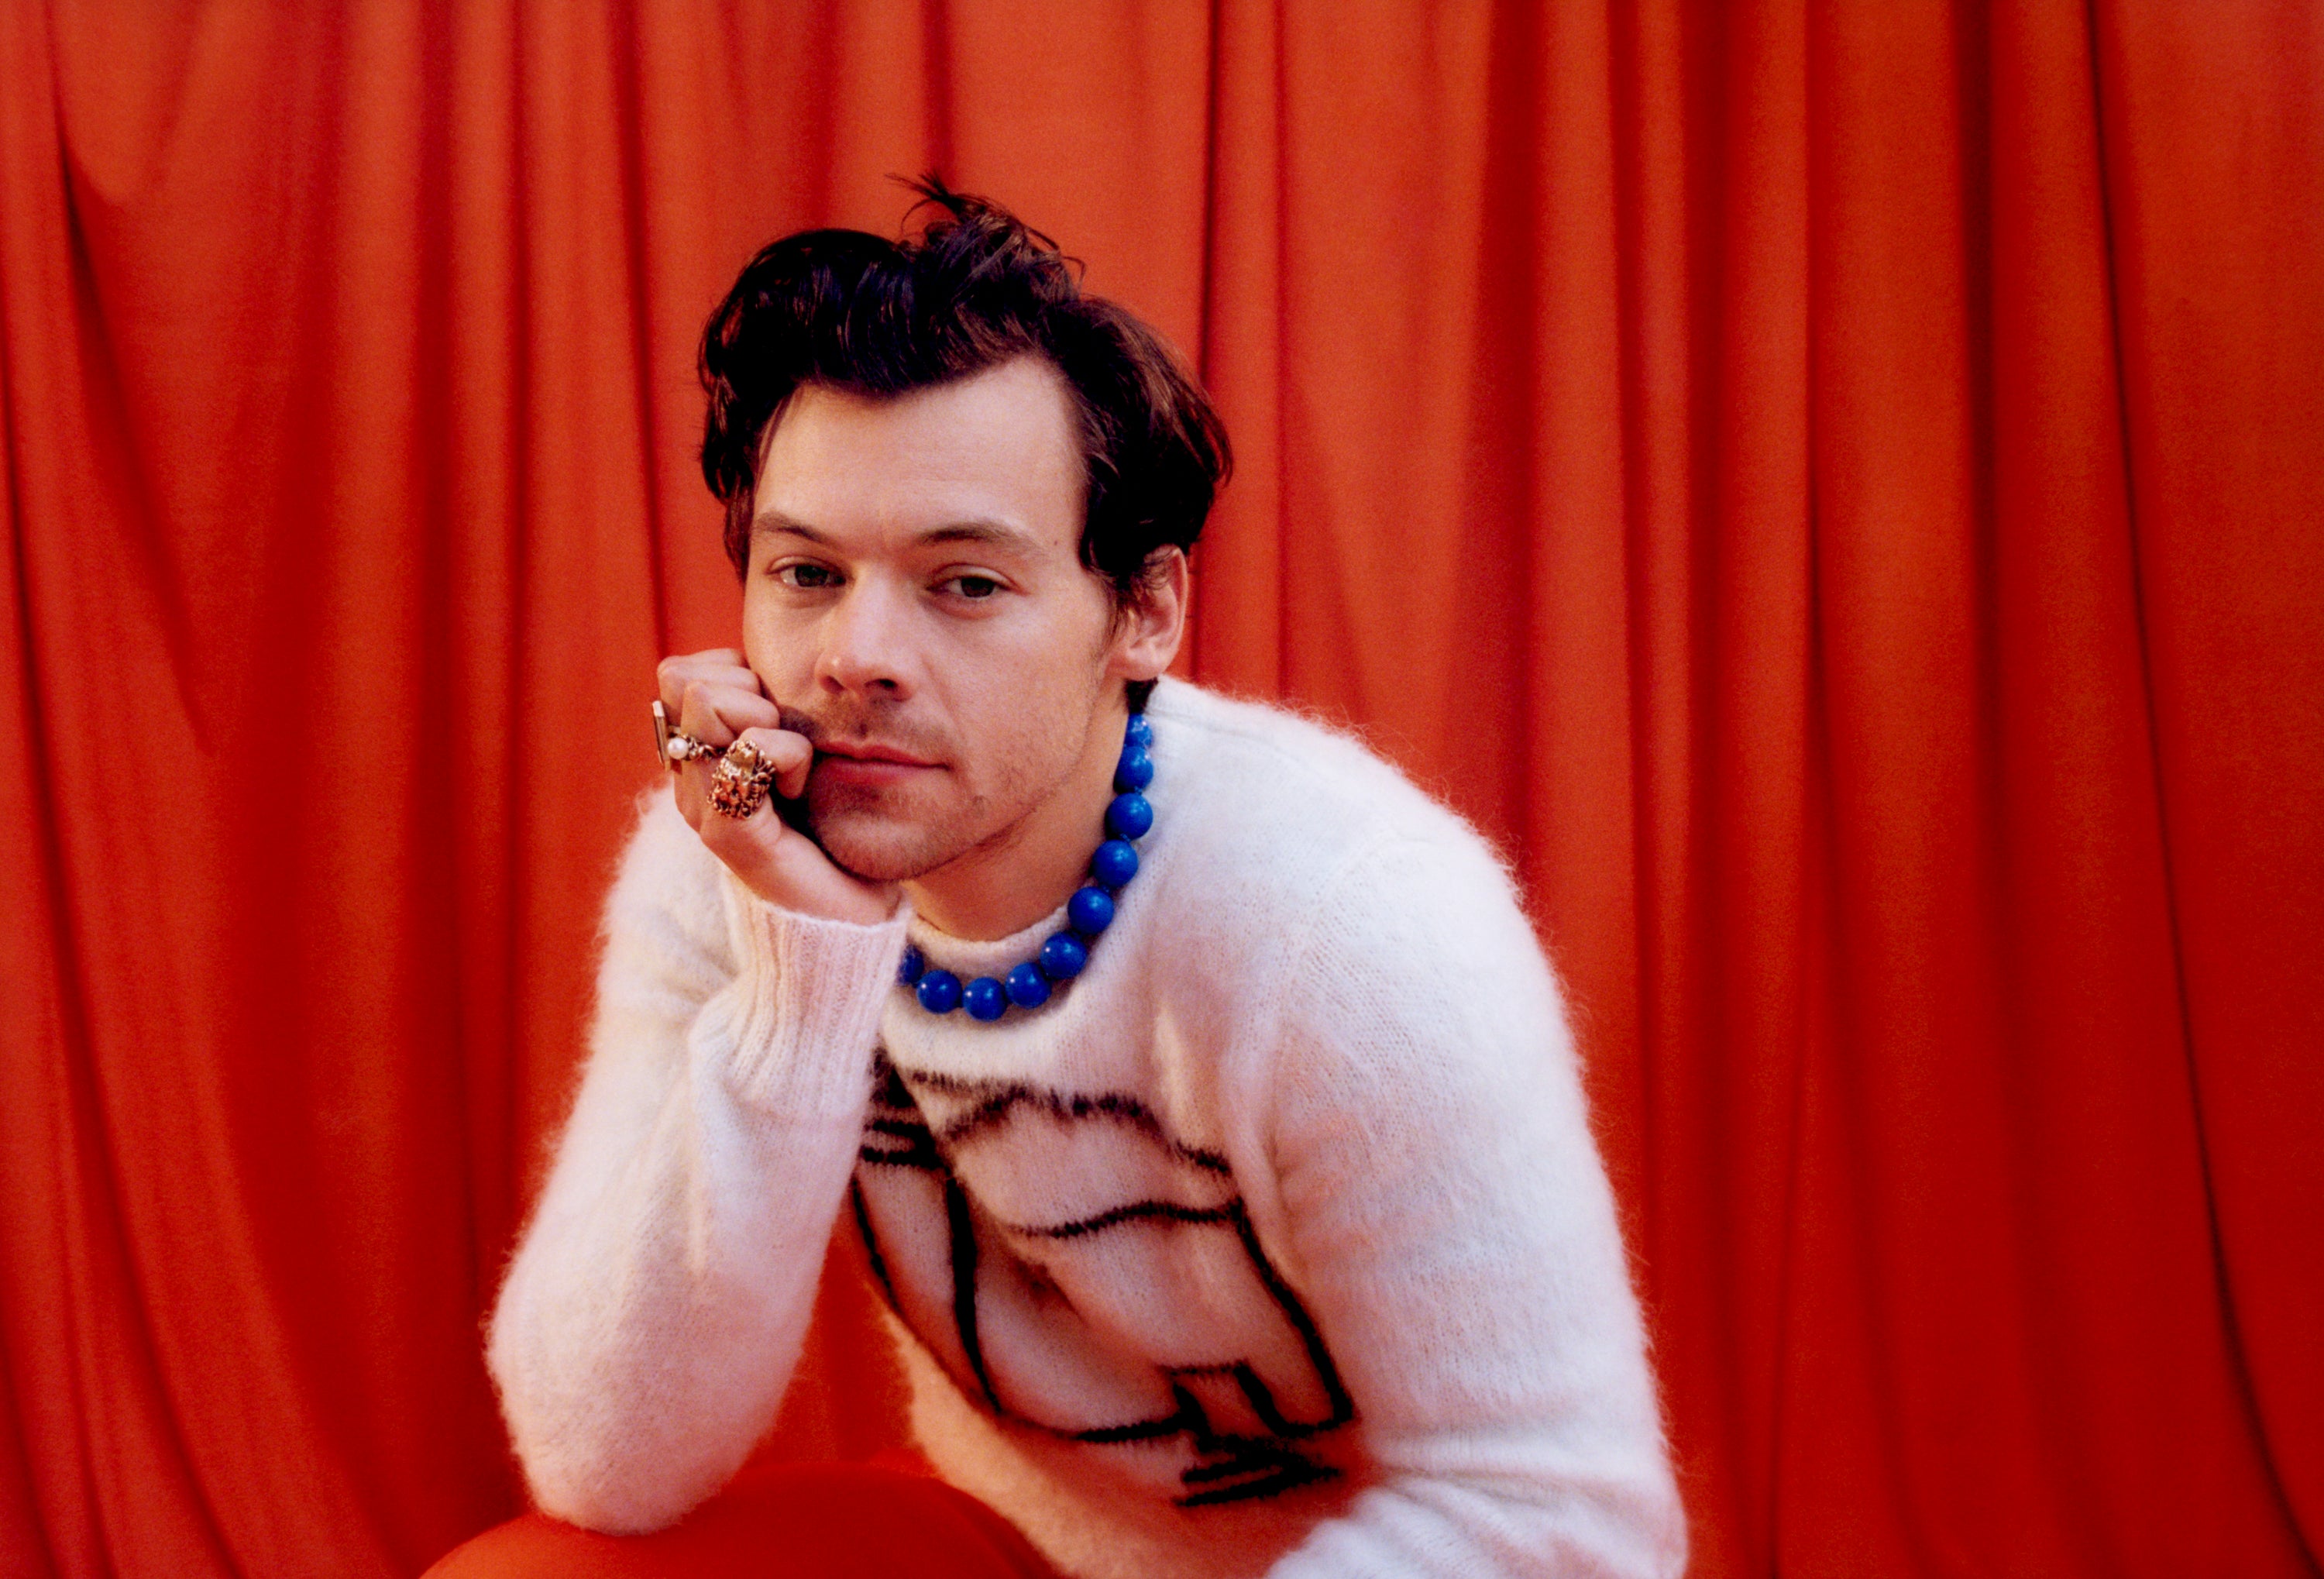 Harry Styles in artwork for his new album